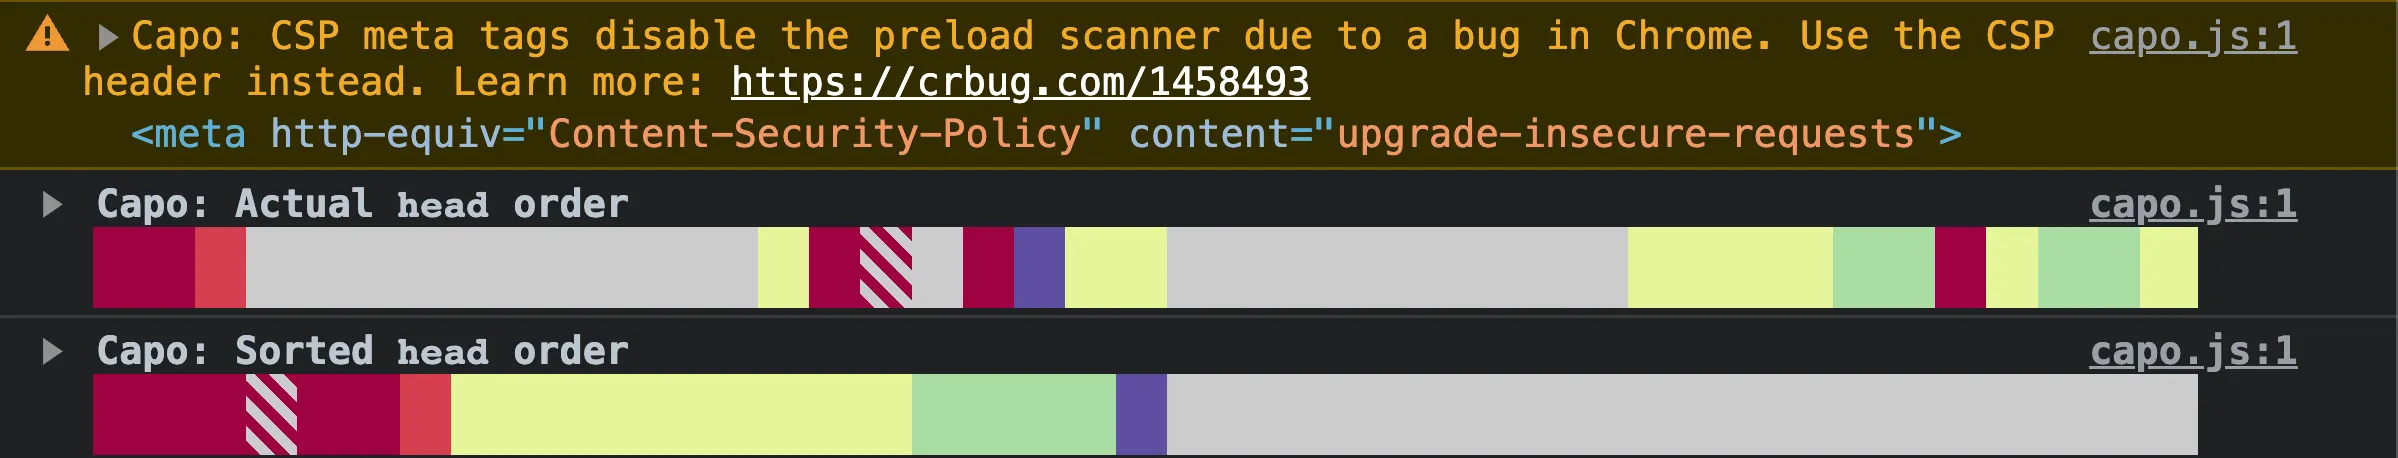 Validation warning that "CSP meta tags disable the preload scanner due to a bug in Chrome. Use the CSP header instead."